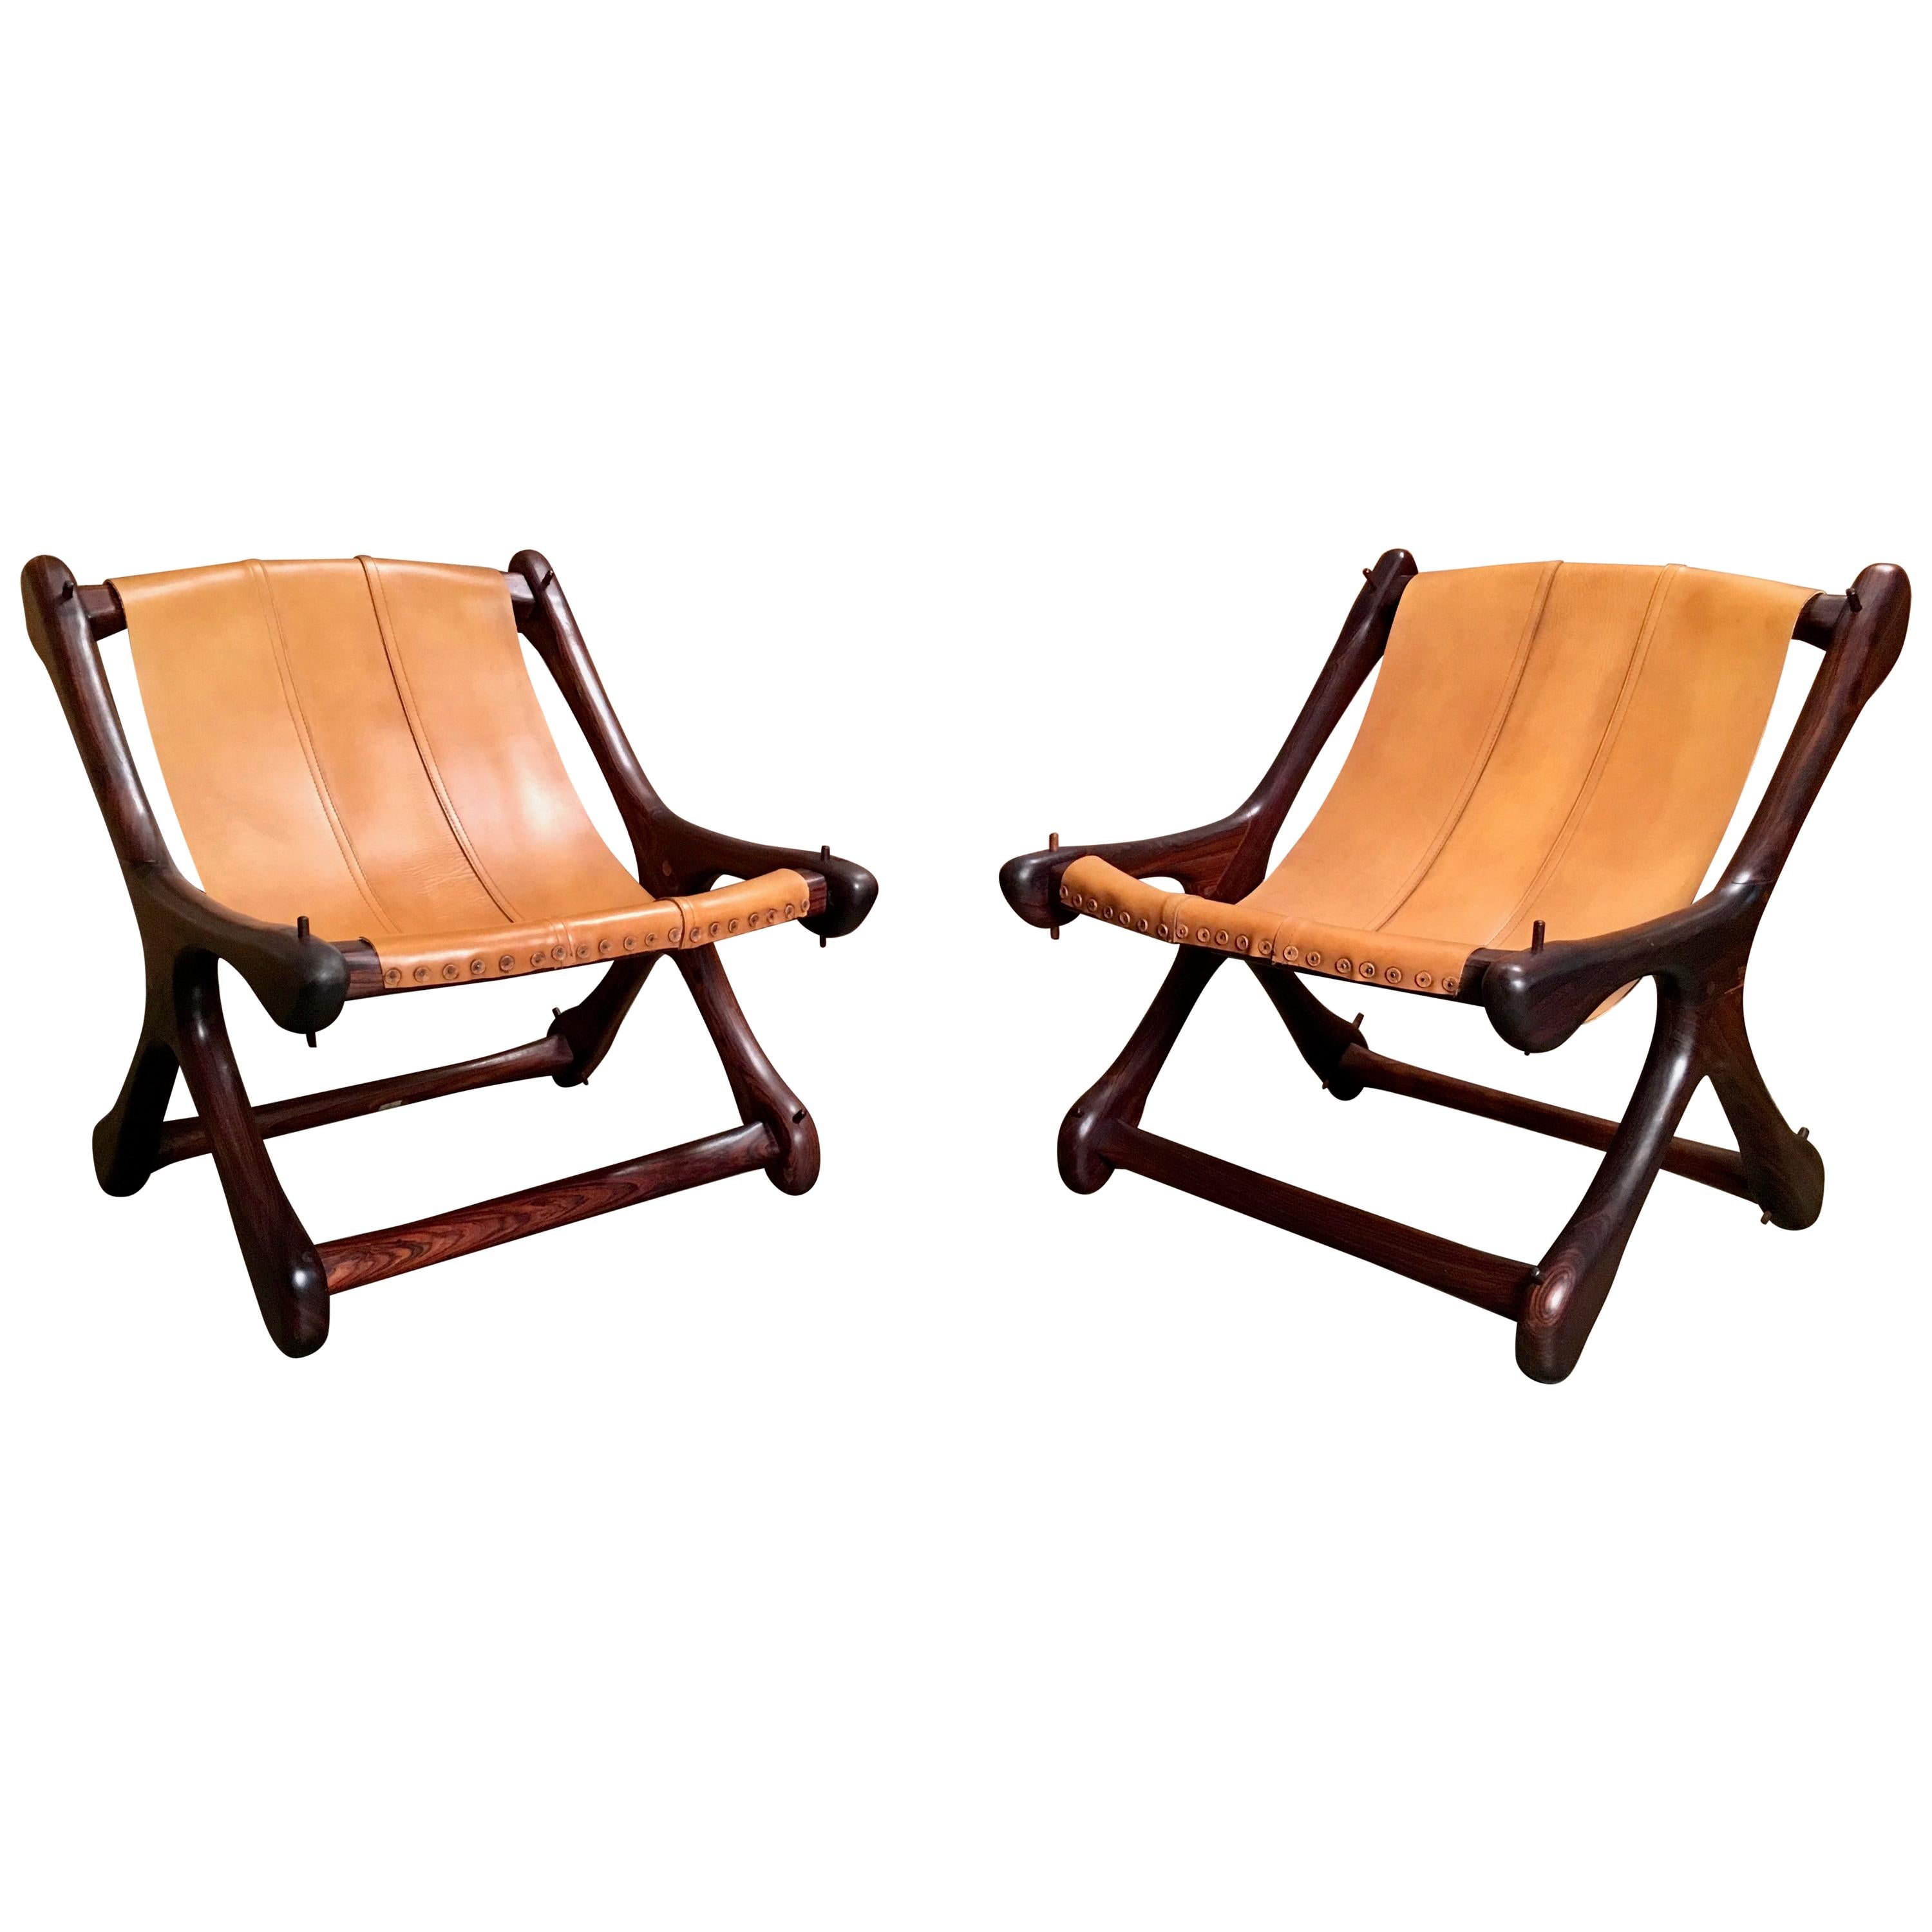 Don Shoemaker "Sloucher" Sling Chairs for Señal Furniture